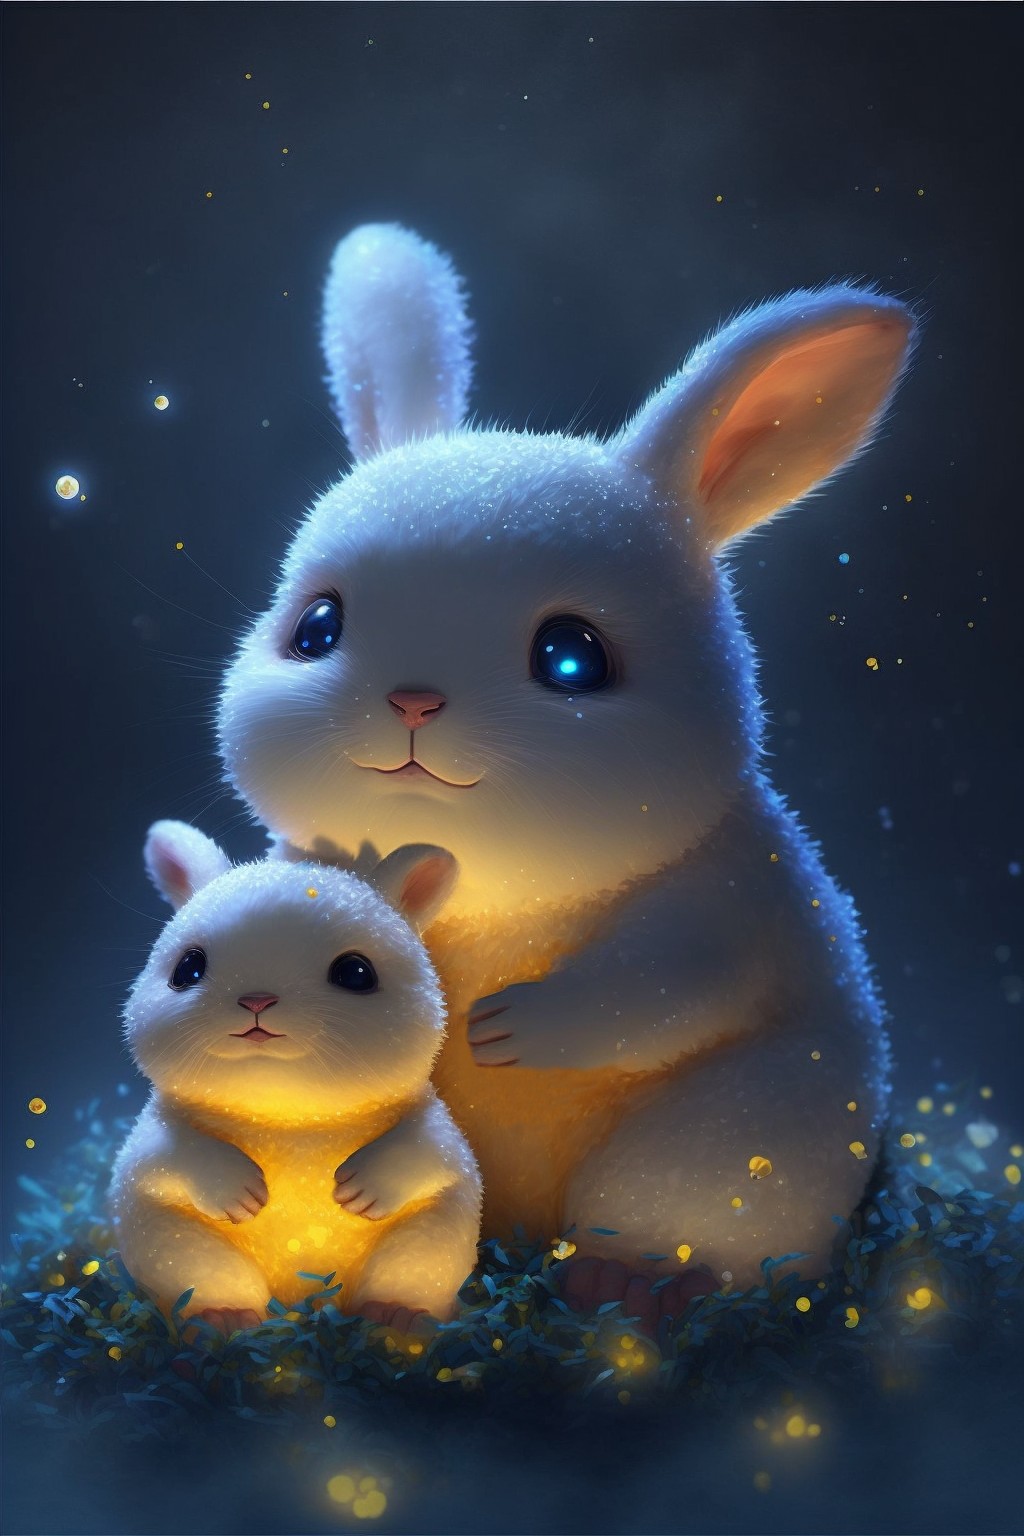 8 images of cute bunny mother and bunny baby by Midjourney